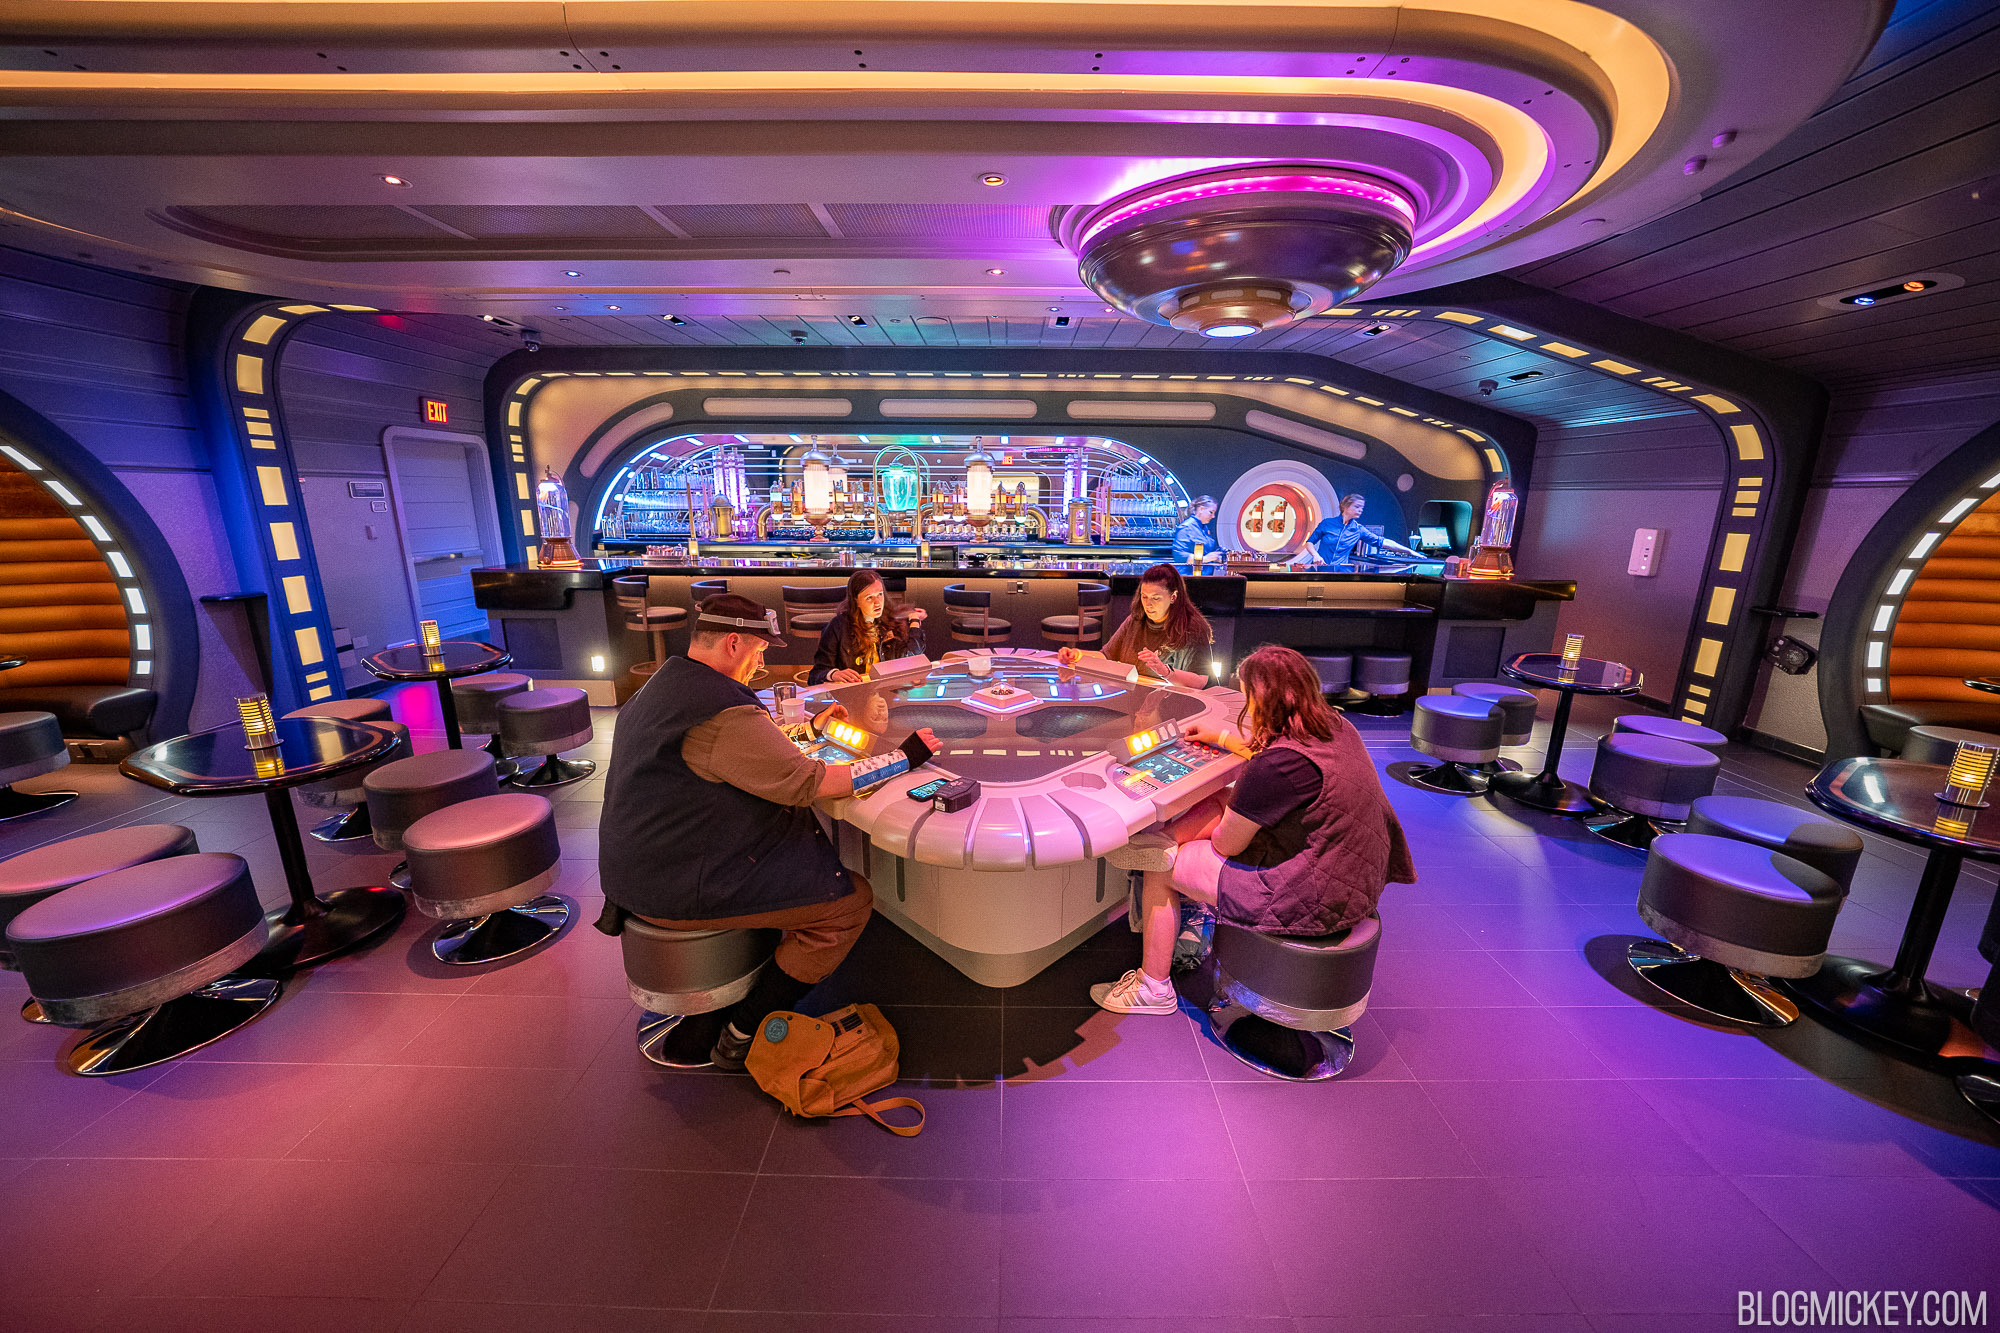 Stellar Souvenir Glasses from the Sublight Lounge on the Star Wars:  Galactic Starcruiser - WDW News Today